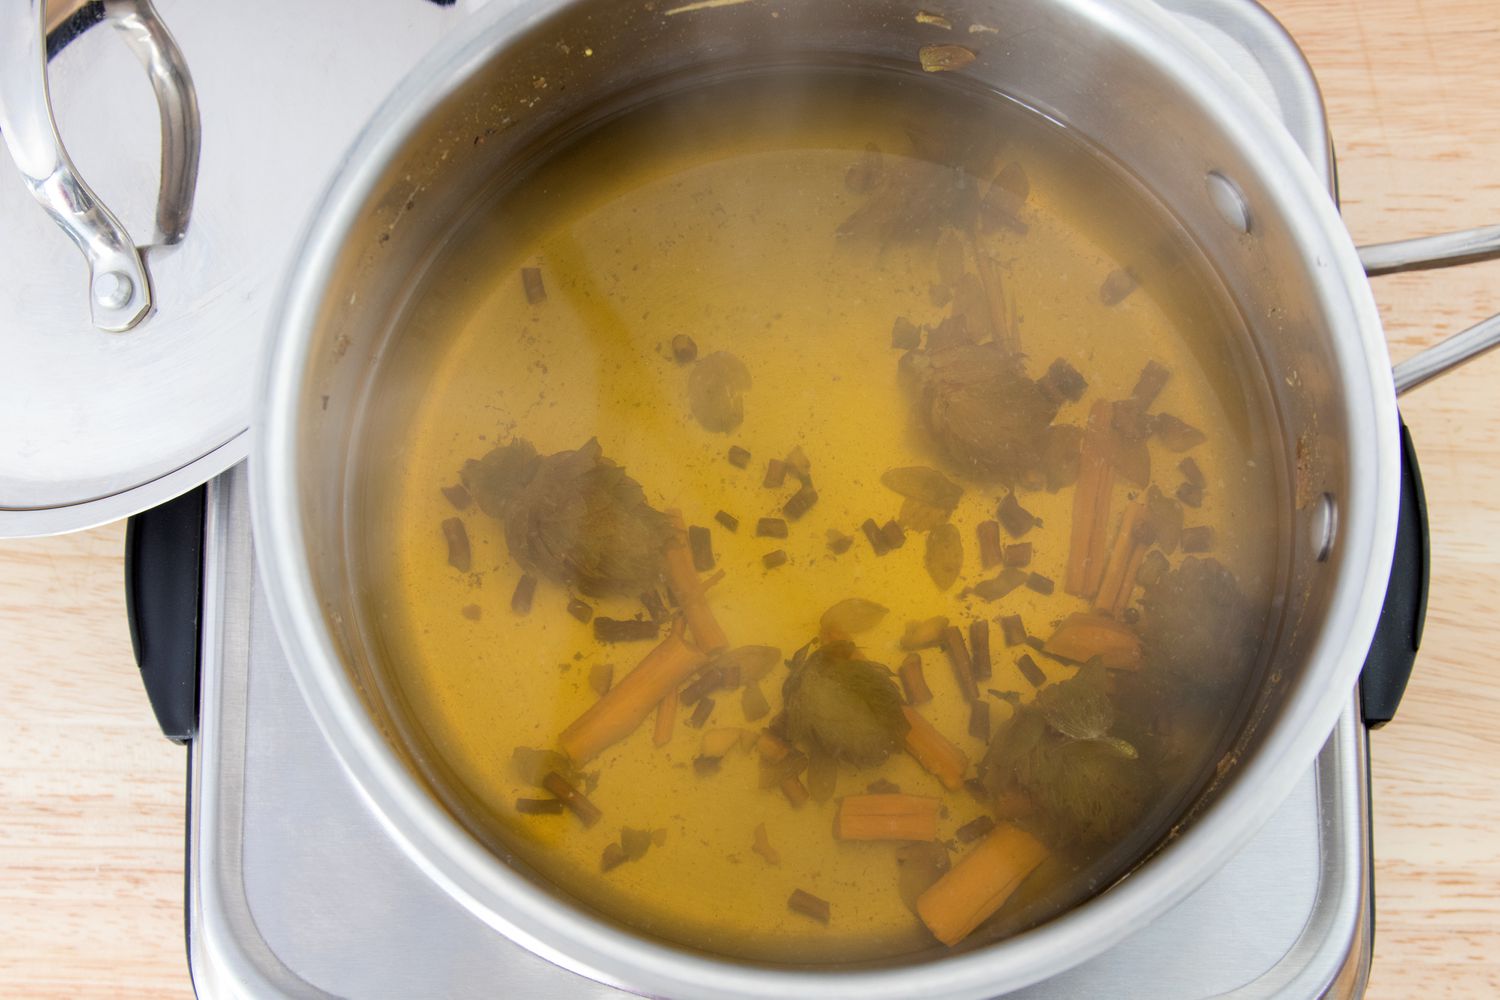 Quassia Bark, Hops, and Dandelion Root Boiling for Homemade Tonic Syrup